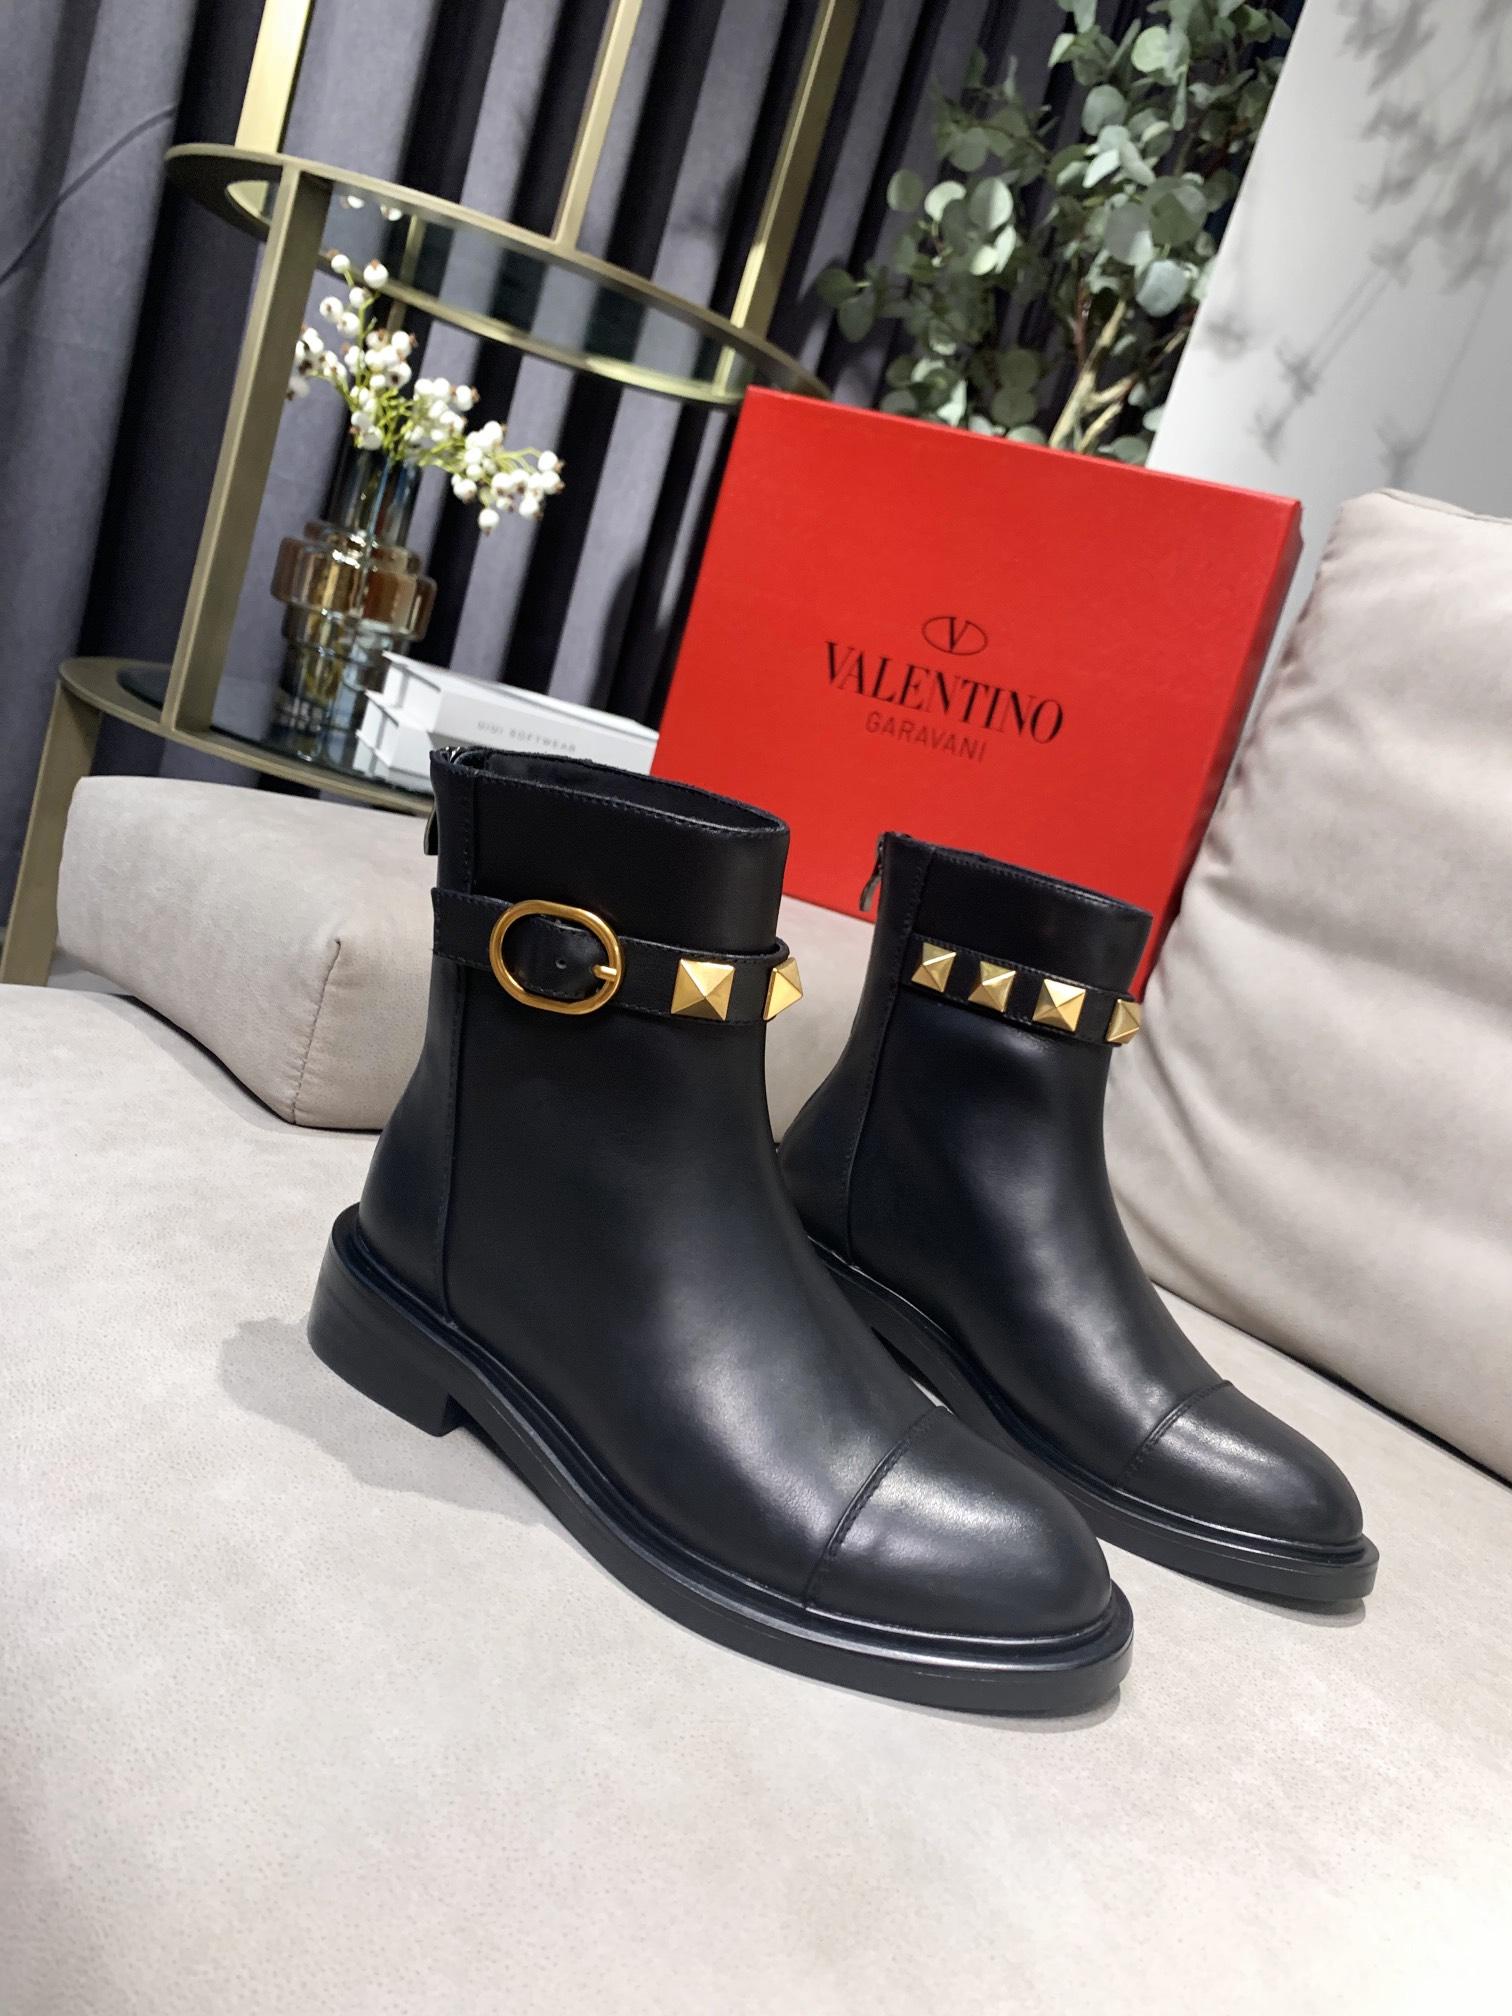 

women boot designer luxury shoes casual fashion vintage high quality High-quality Vamp cowhide inner lining sheepskin Rivet elementwith box, Color1